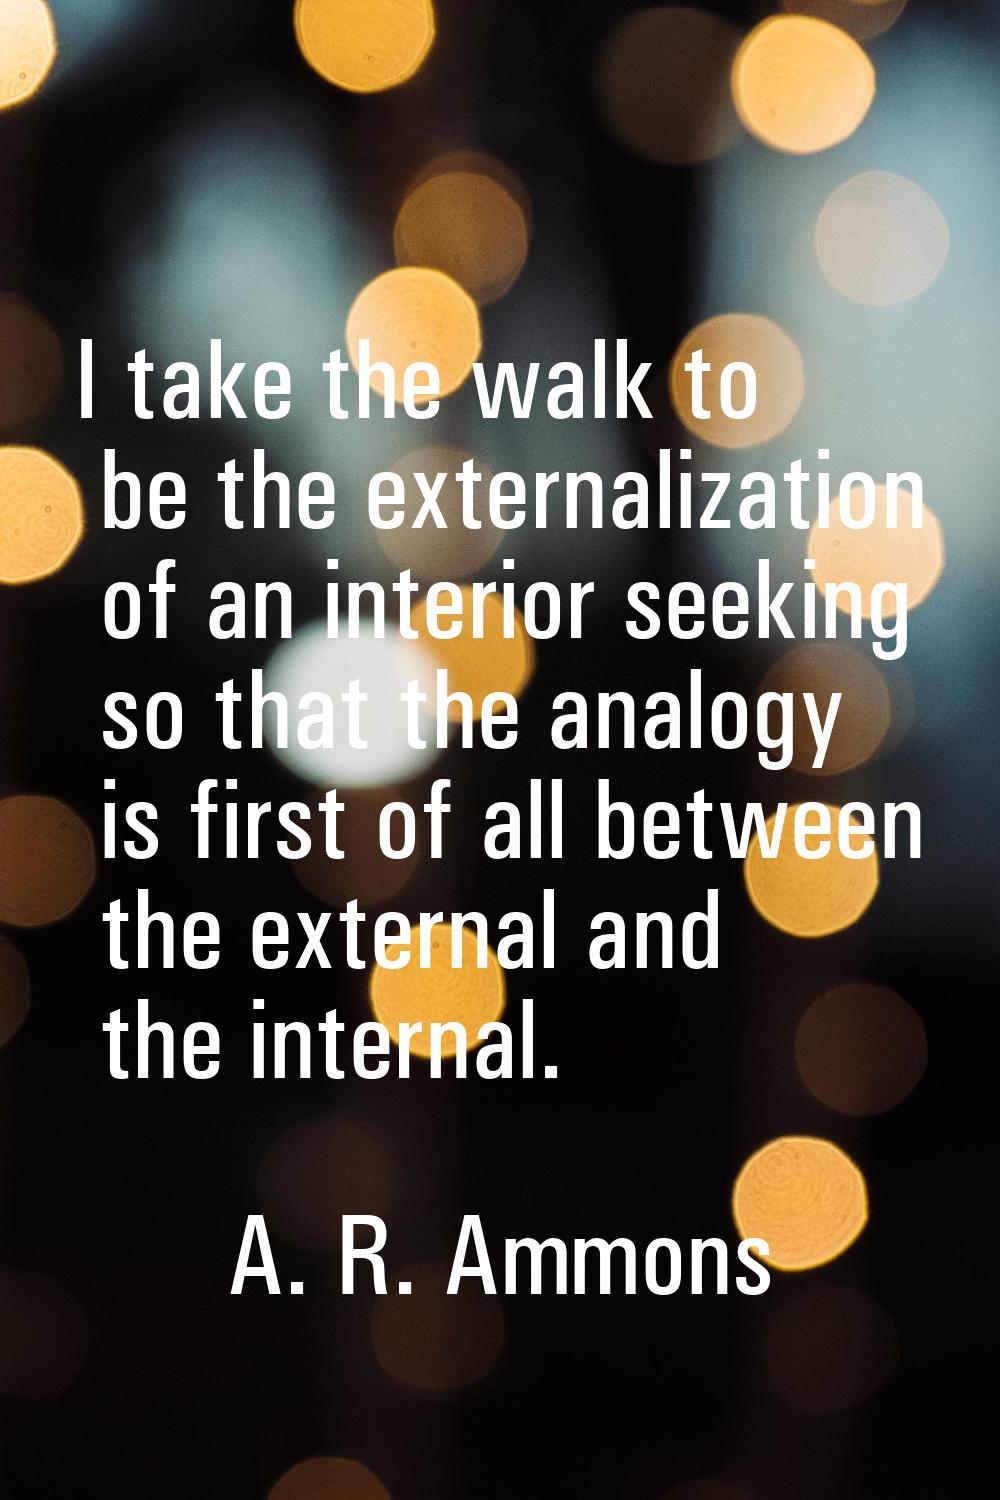 I take the walk to be the externalization of an interior seeking so that the analogy is first of al